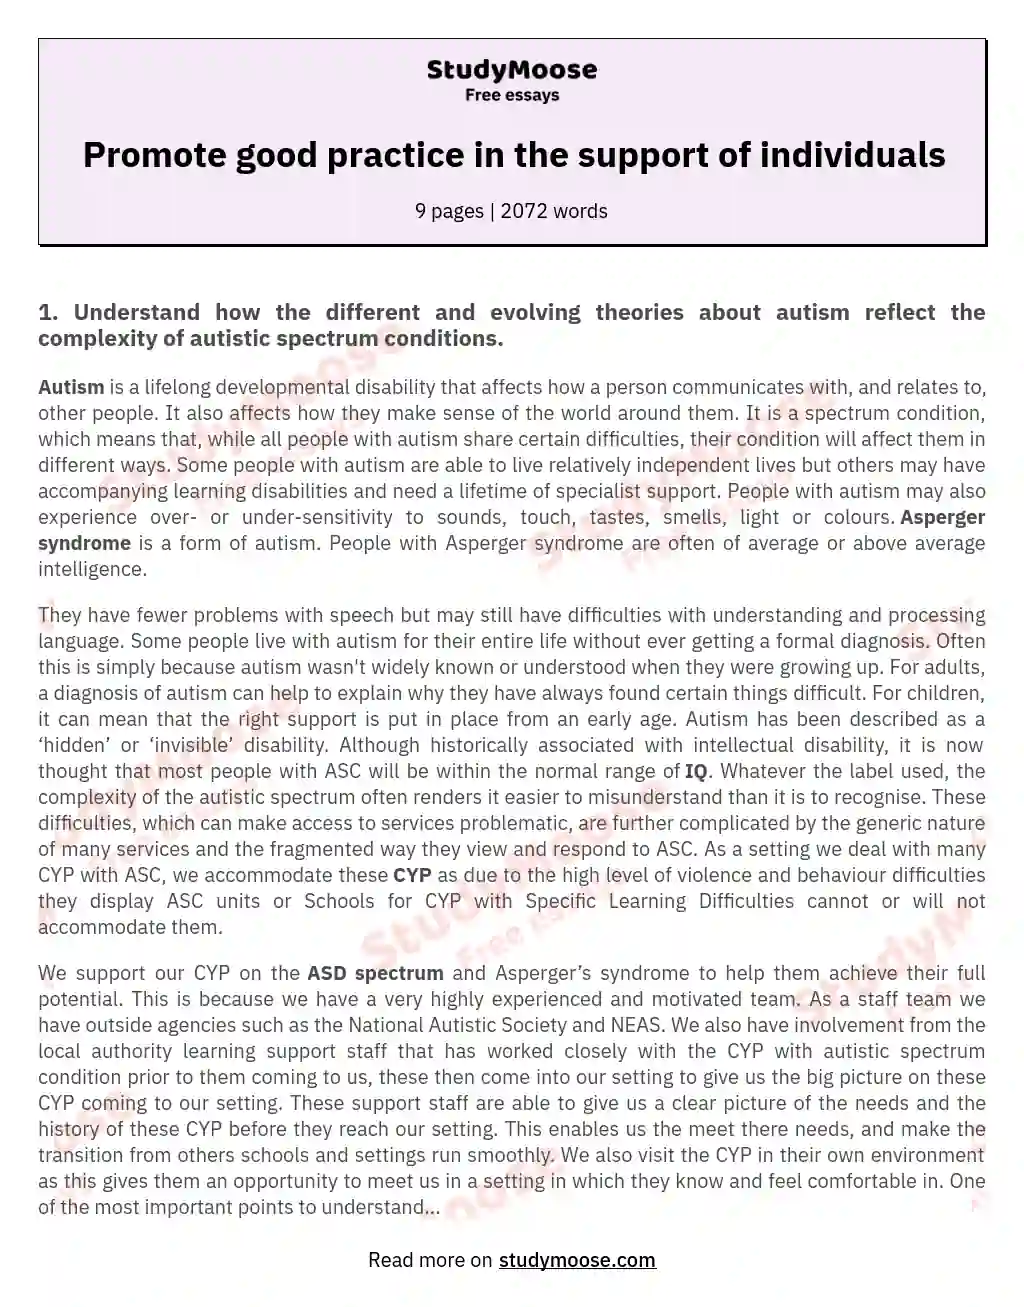 Promote good practice in the support of individuals essay